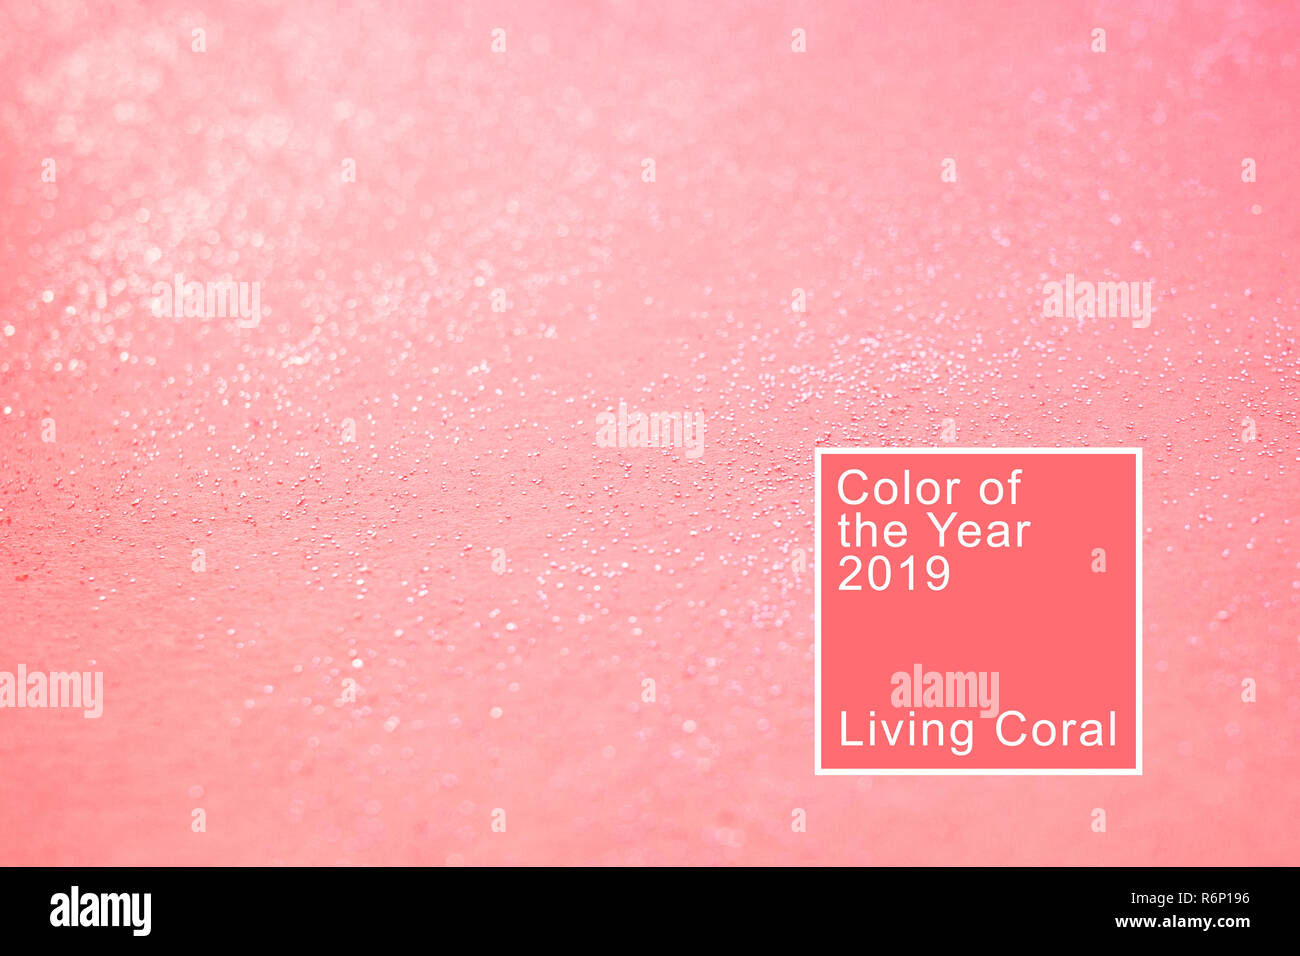 Coral background with glitter. Living coral. Color of the year 2019. Stock Photo